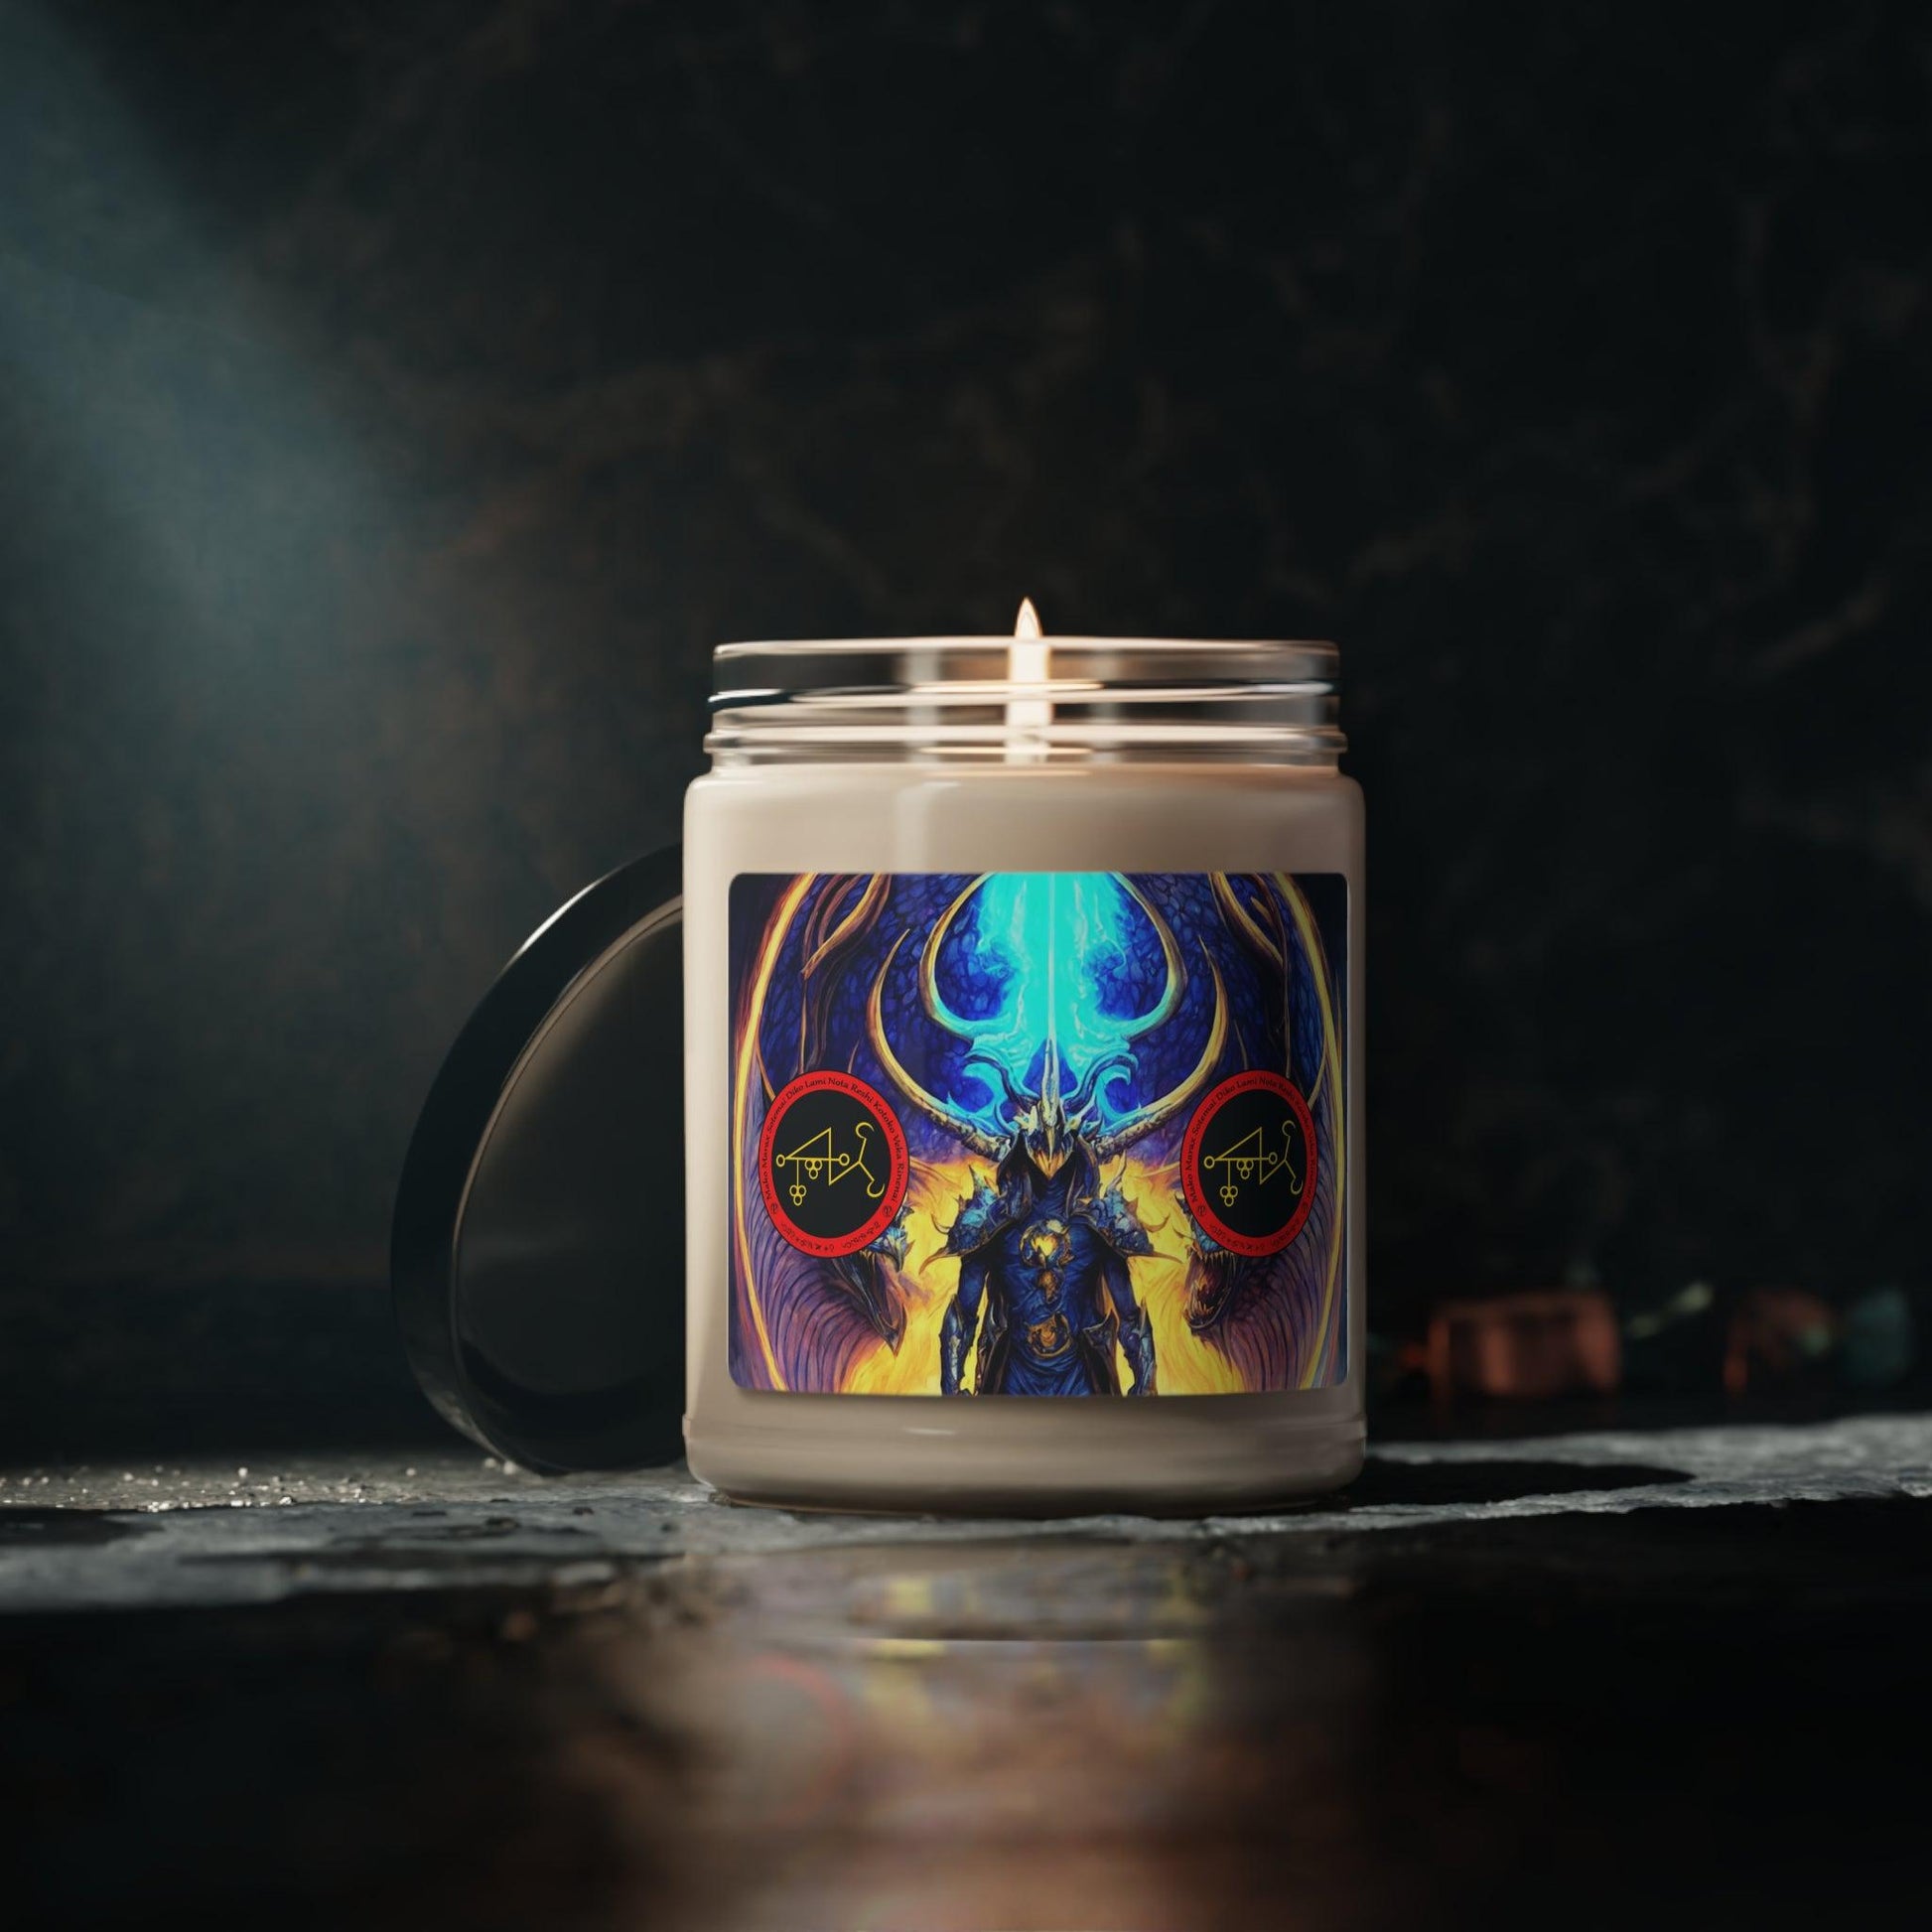 Demon-Marax-Altar-Scented-Soy-Candle-To-Learn-Magic-and-witchcraft-in-offerings-rituals-initiations-or-praying-and-meditation-25